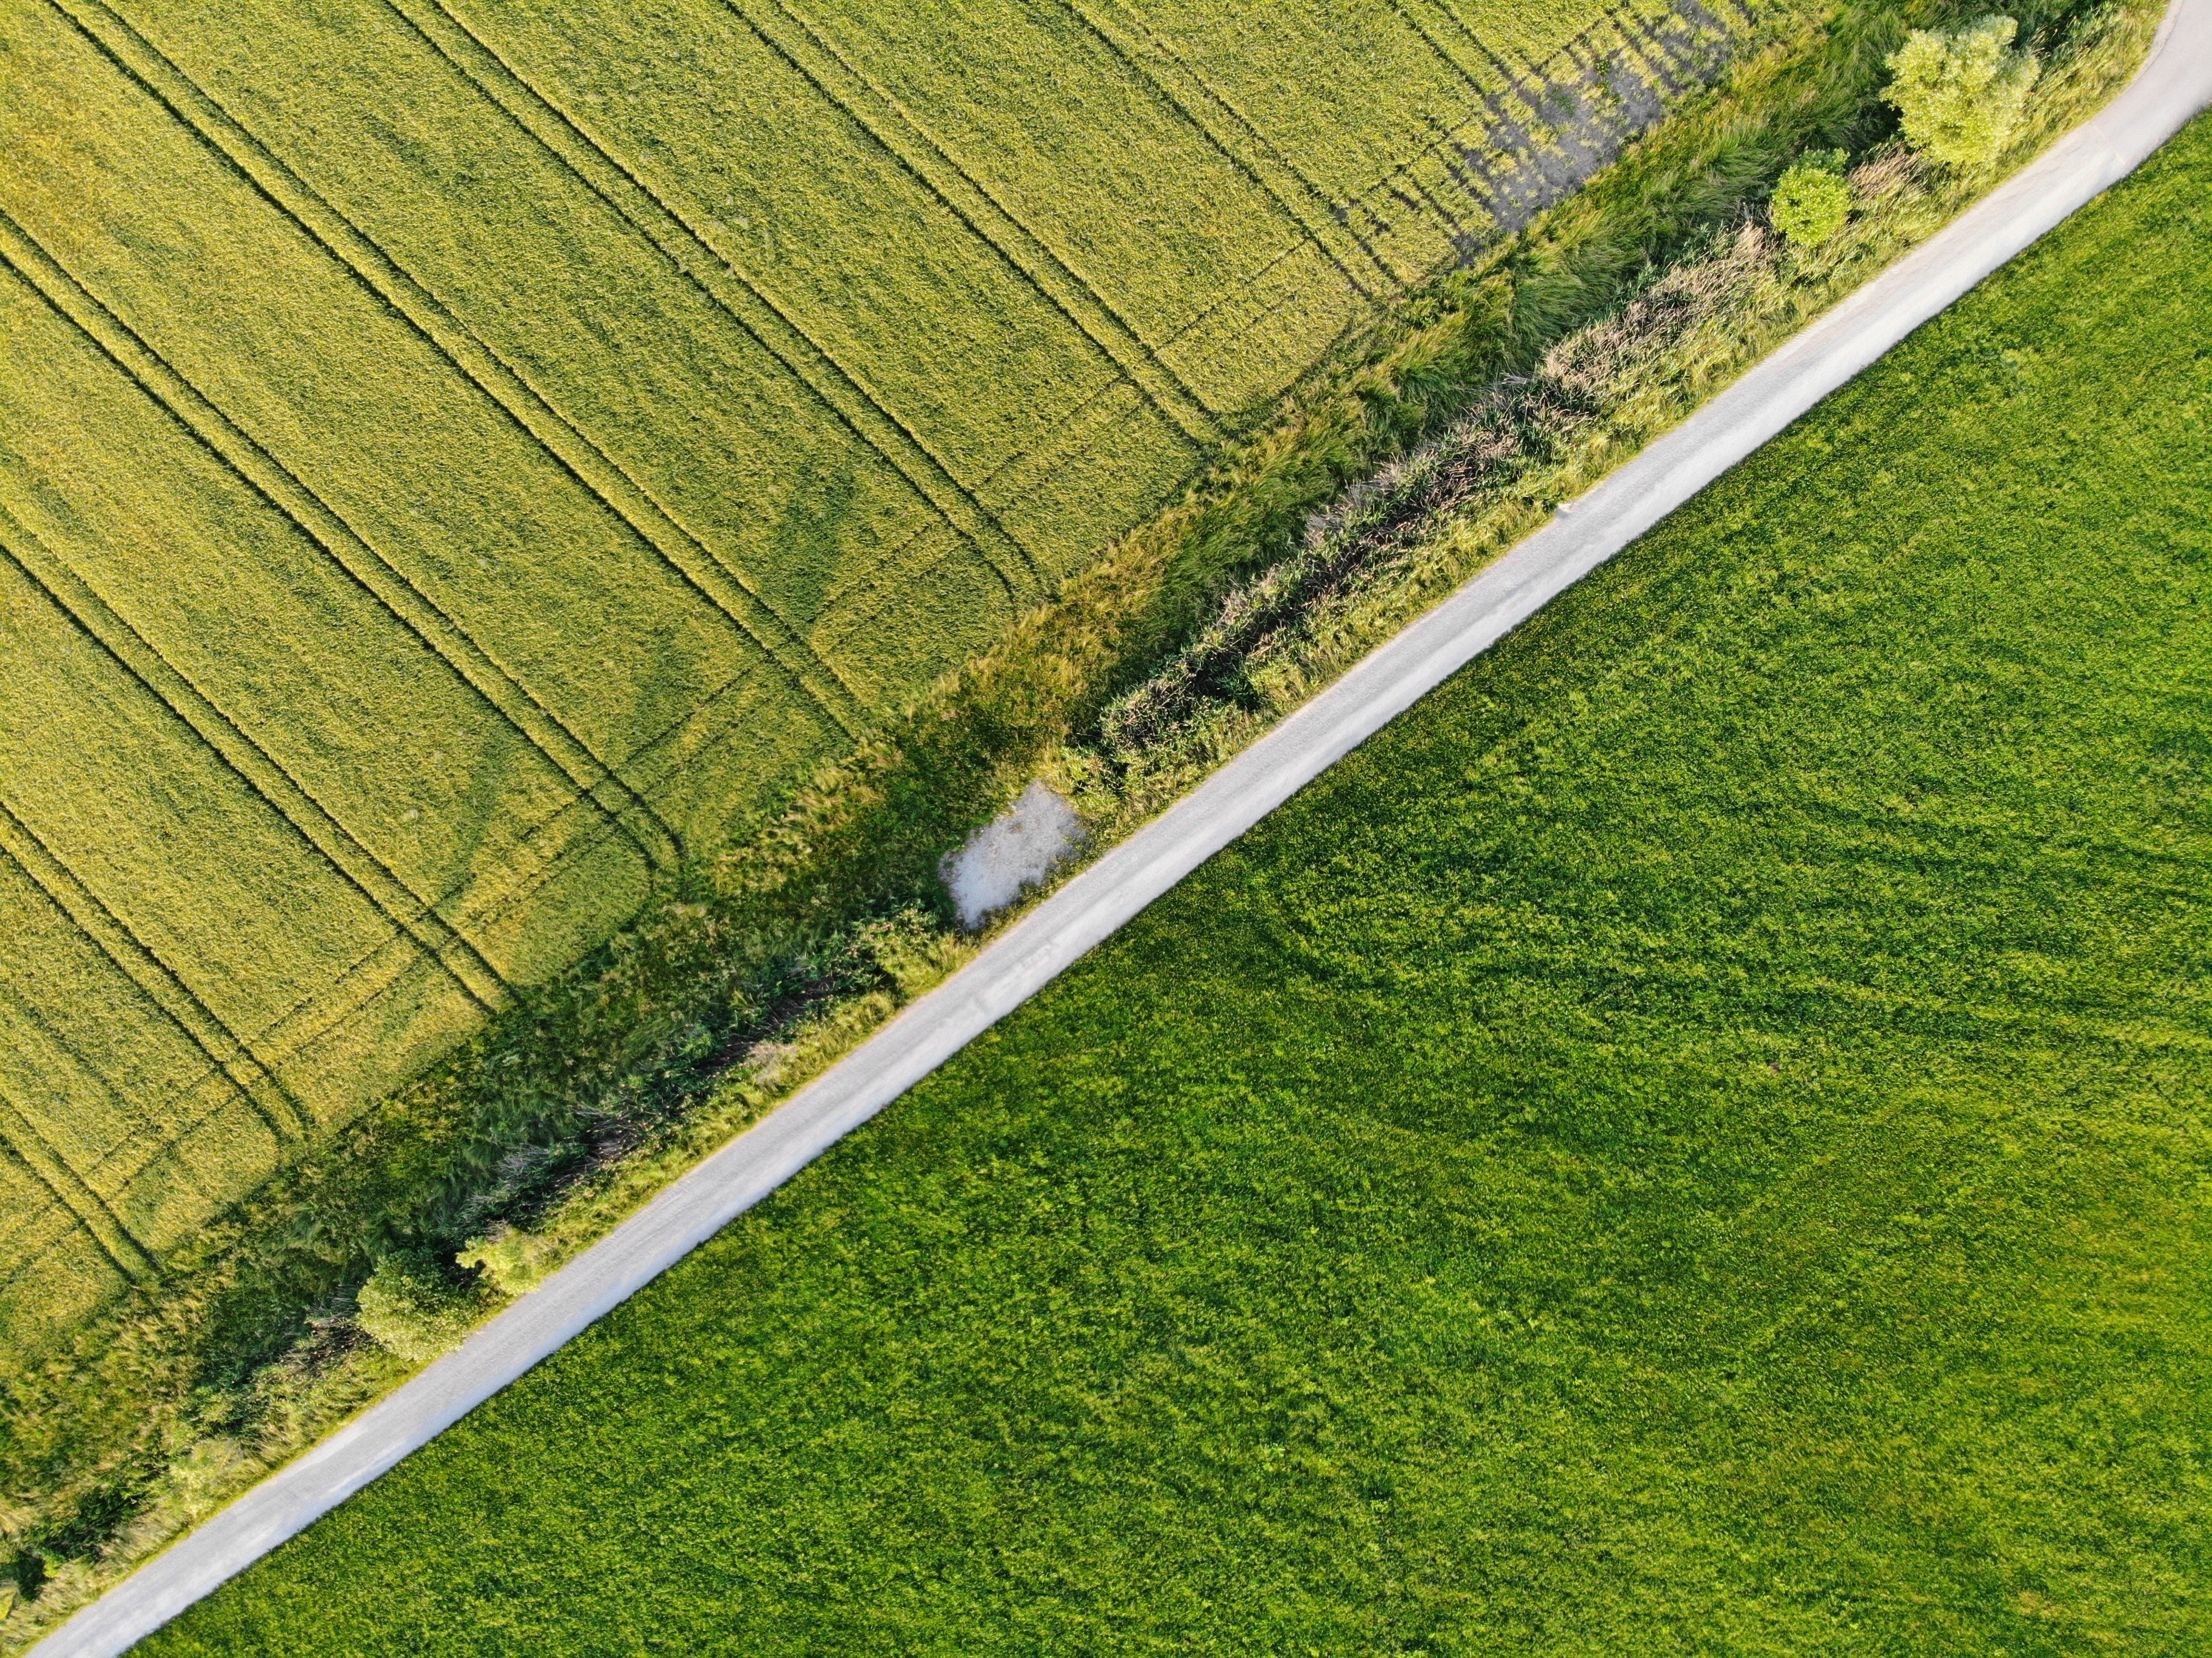 What You Should Know About Buying Land